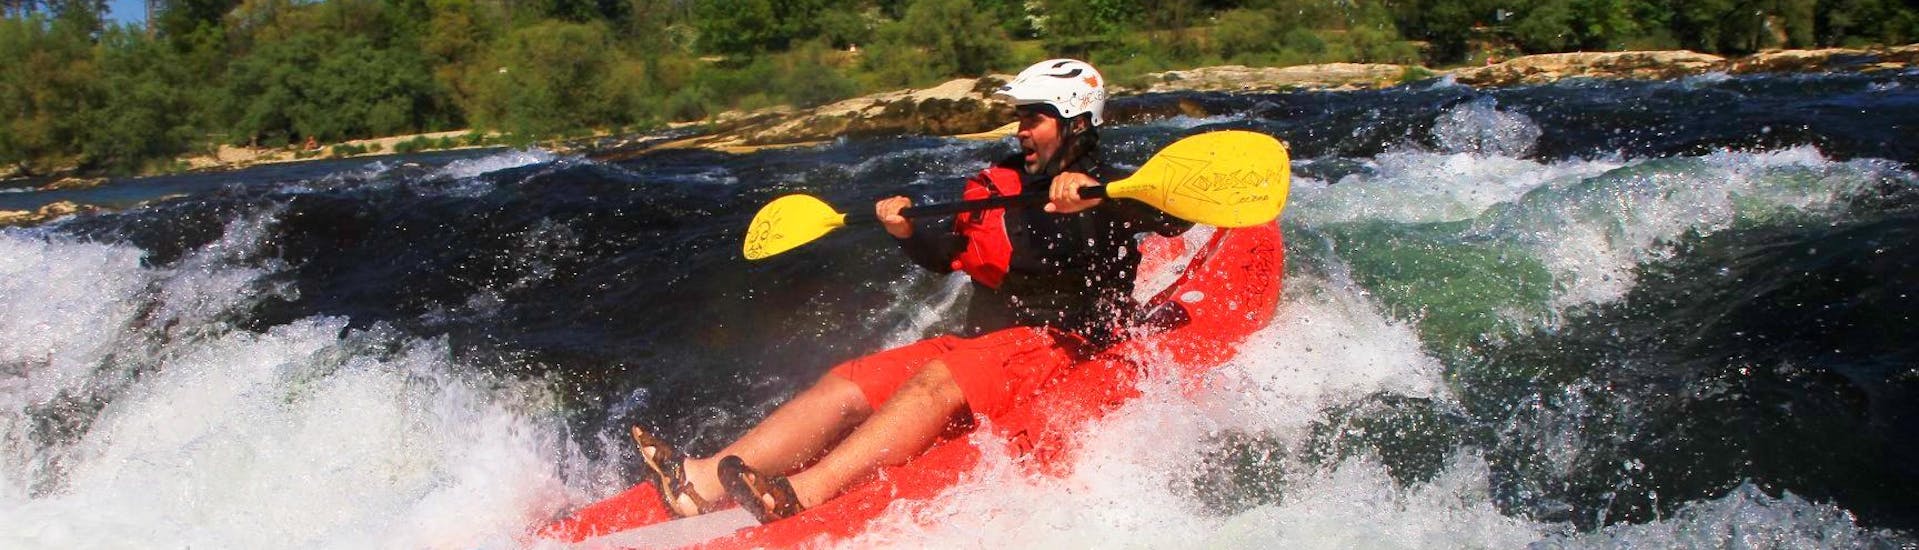 During the Rafting in a FUNYak on the Rhine - Wild Rhine with Rheinraft, a participant conquers a rapid in his agile, inflatable kayak.